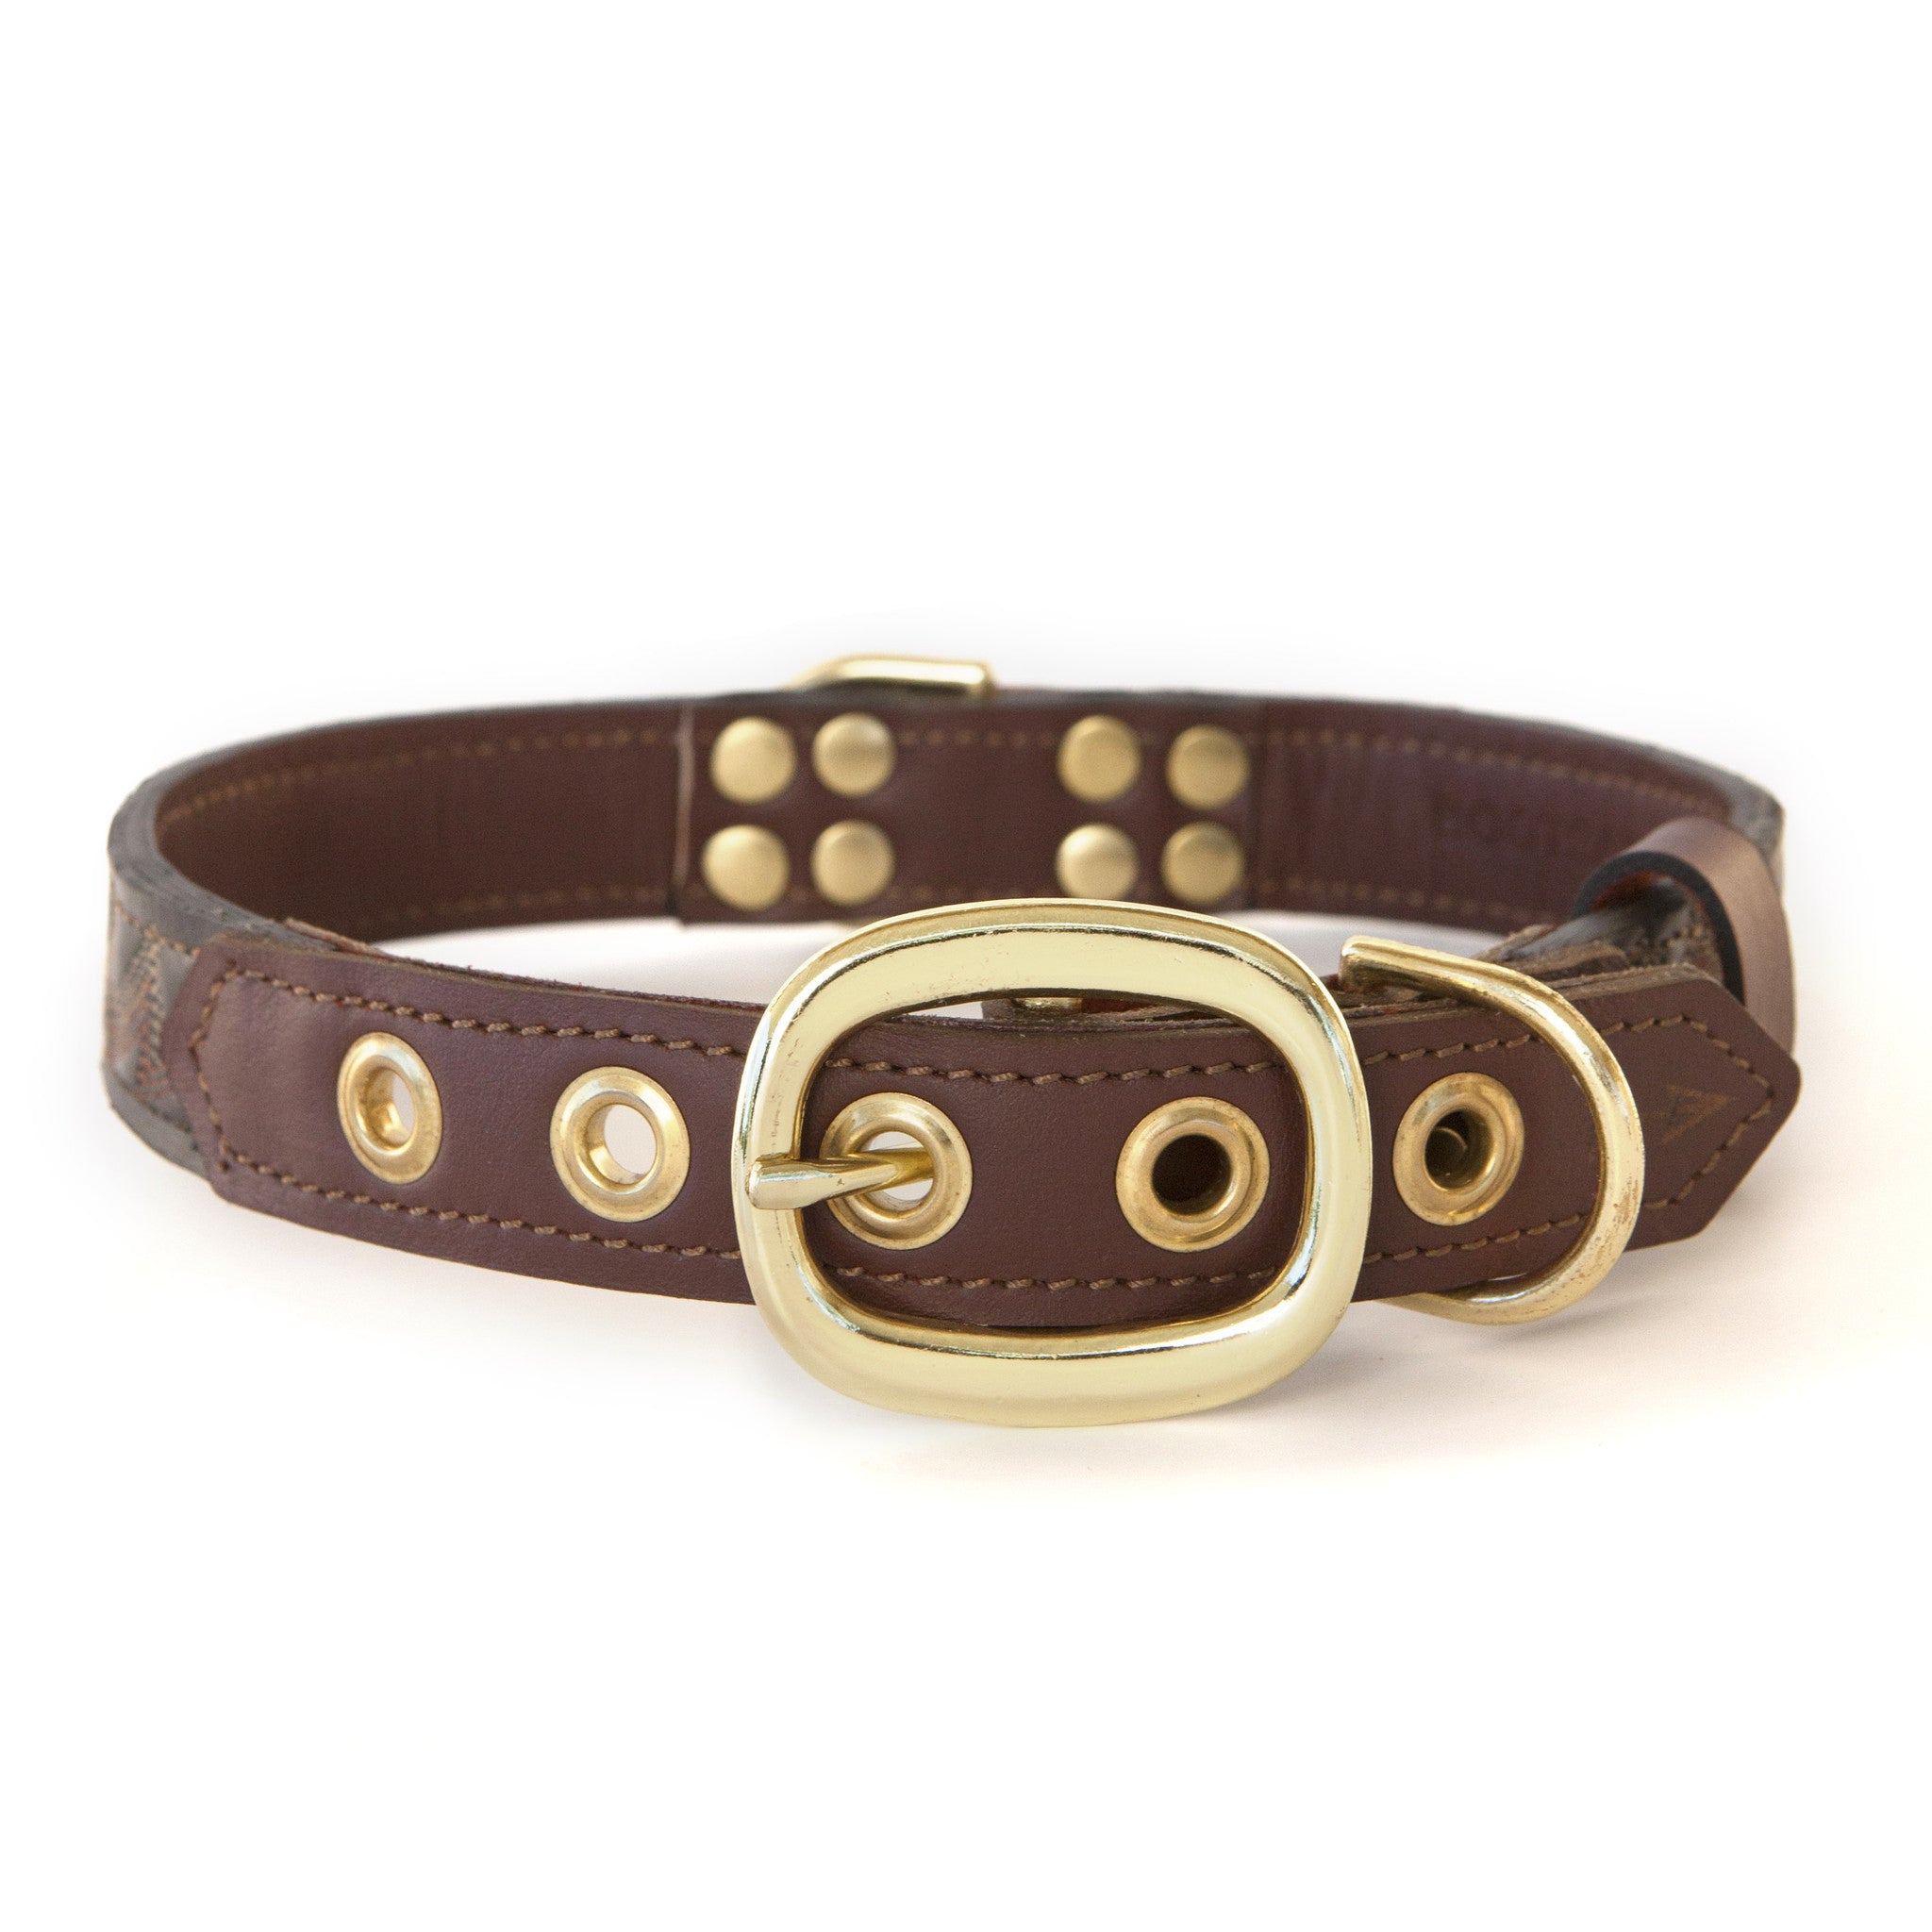 Mahogany Brown Dog Collar with Black Leather + Tan/Light Brown Stitching